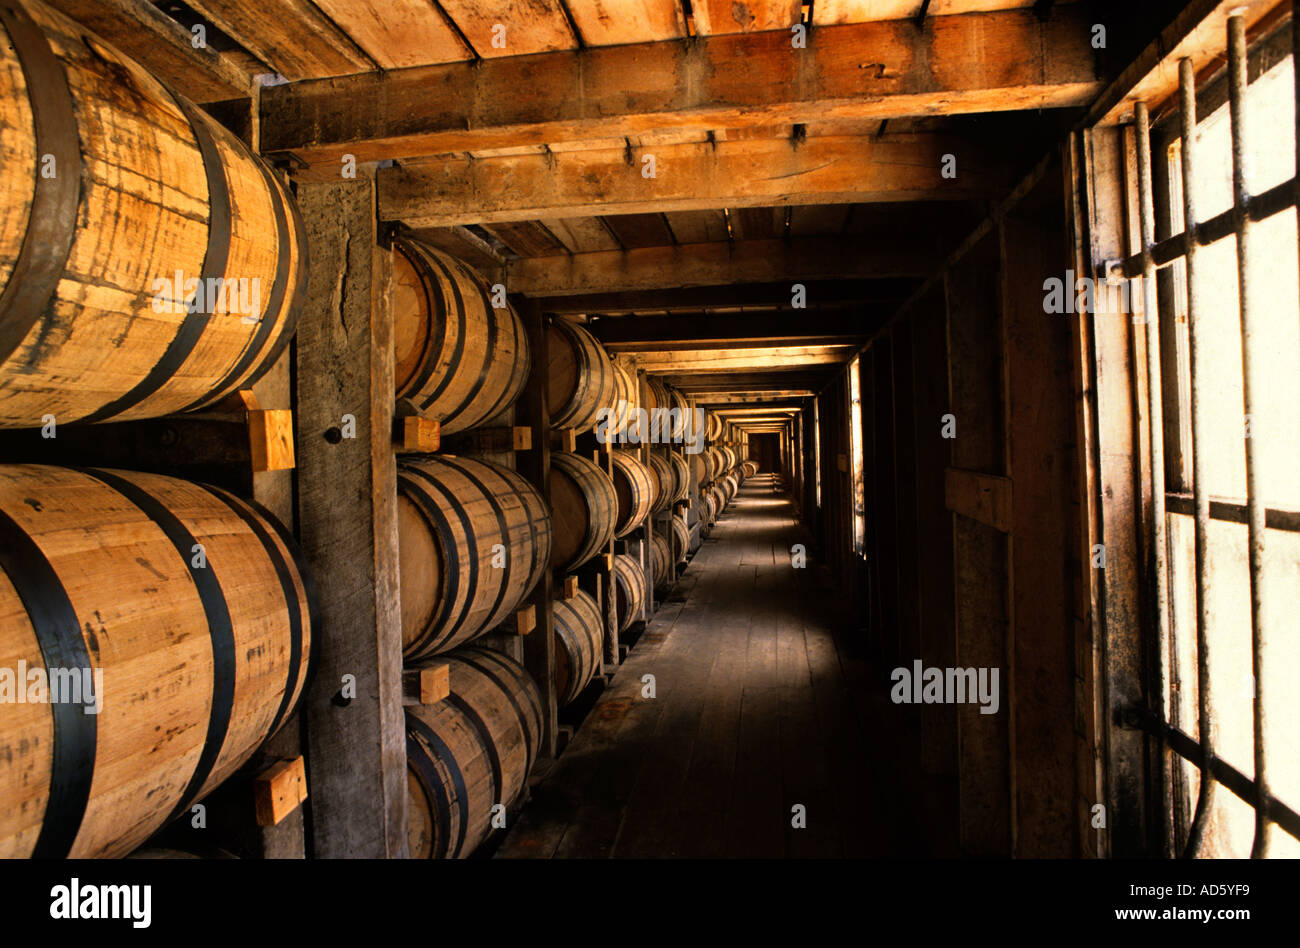 Jack Daniel's Tennessee United States of America USA Bourbon Whisky Distillery Banque D'Images